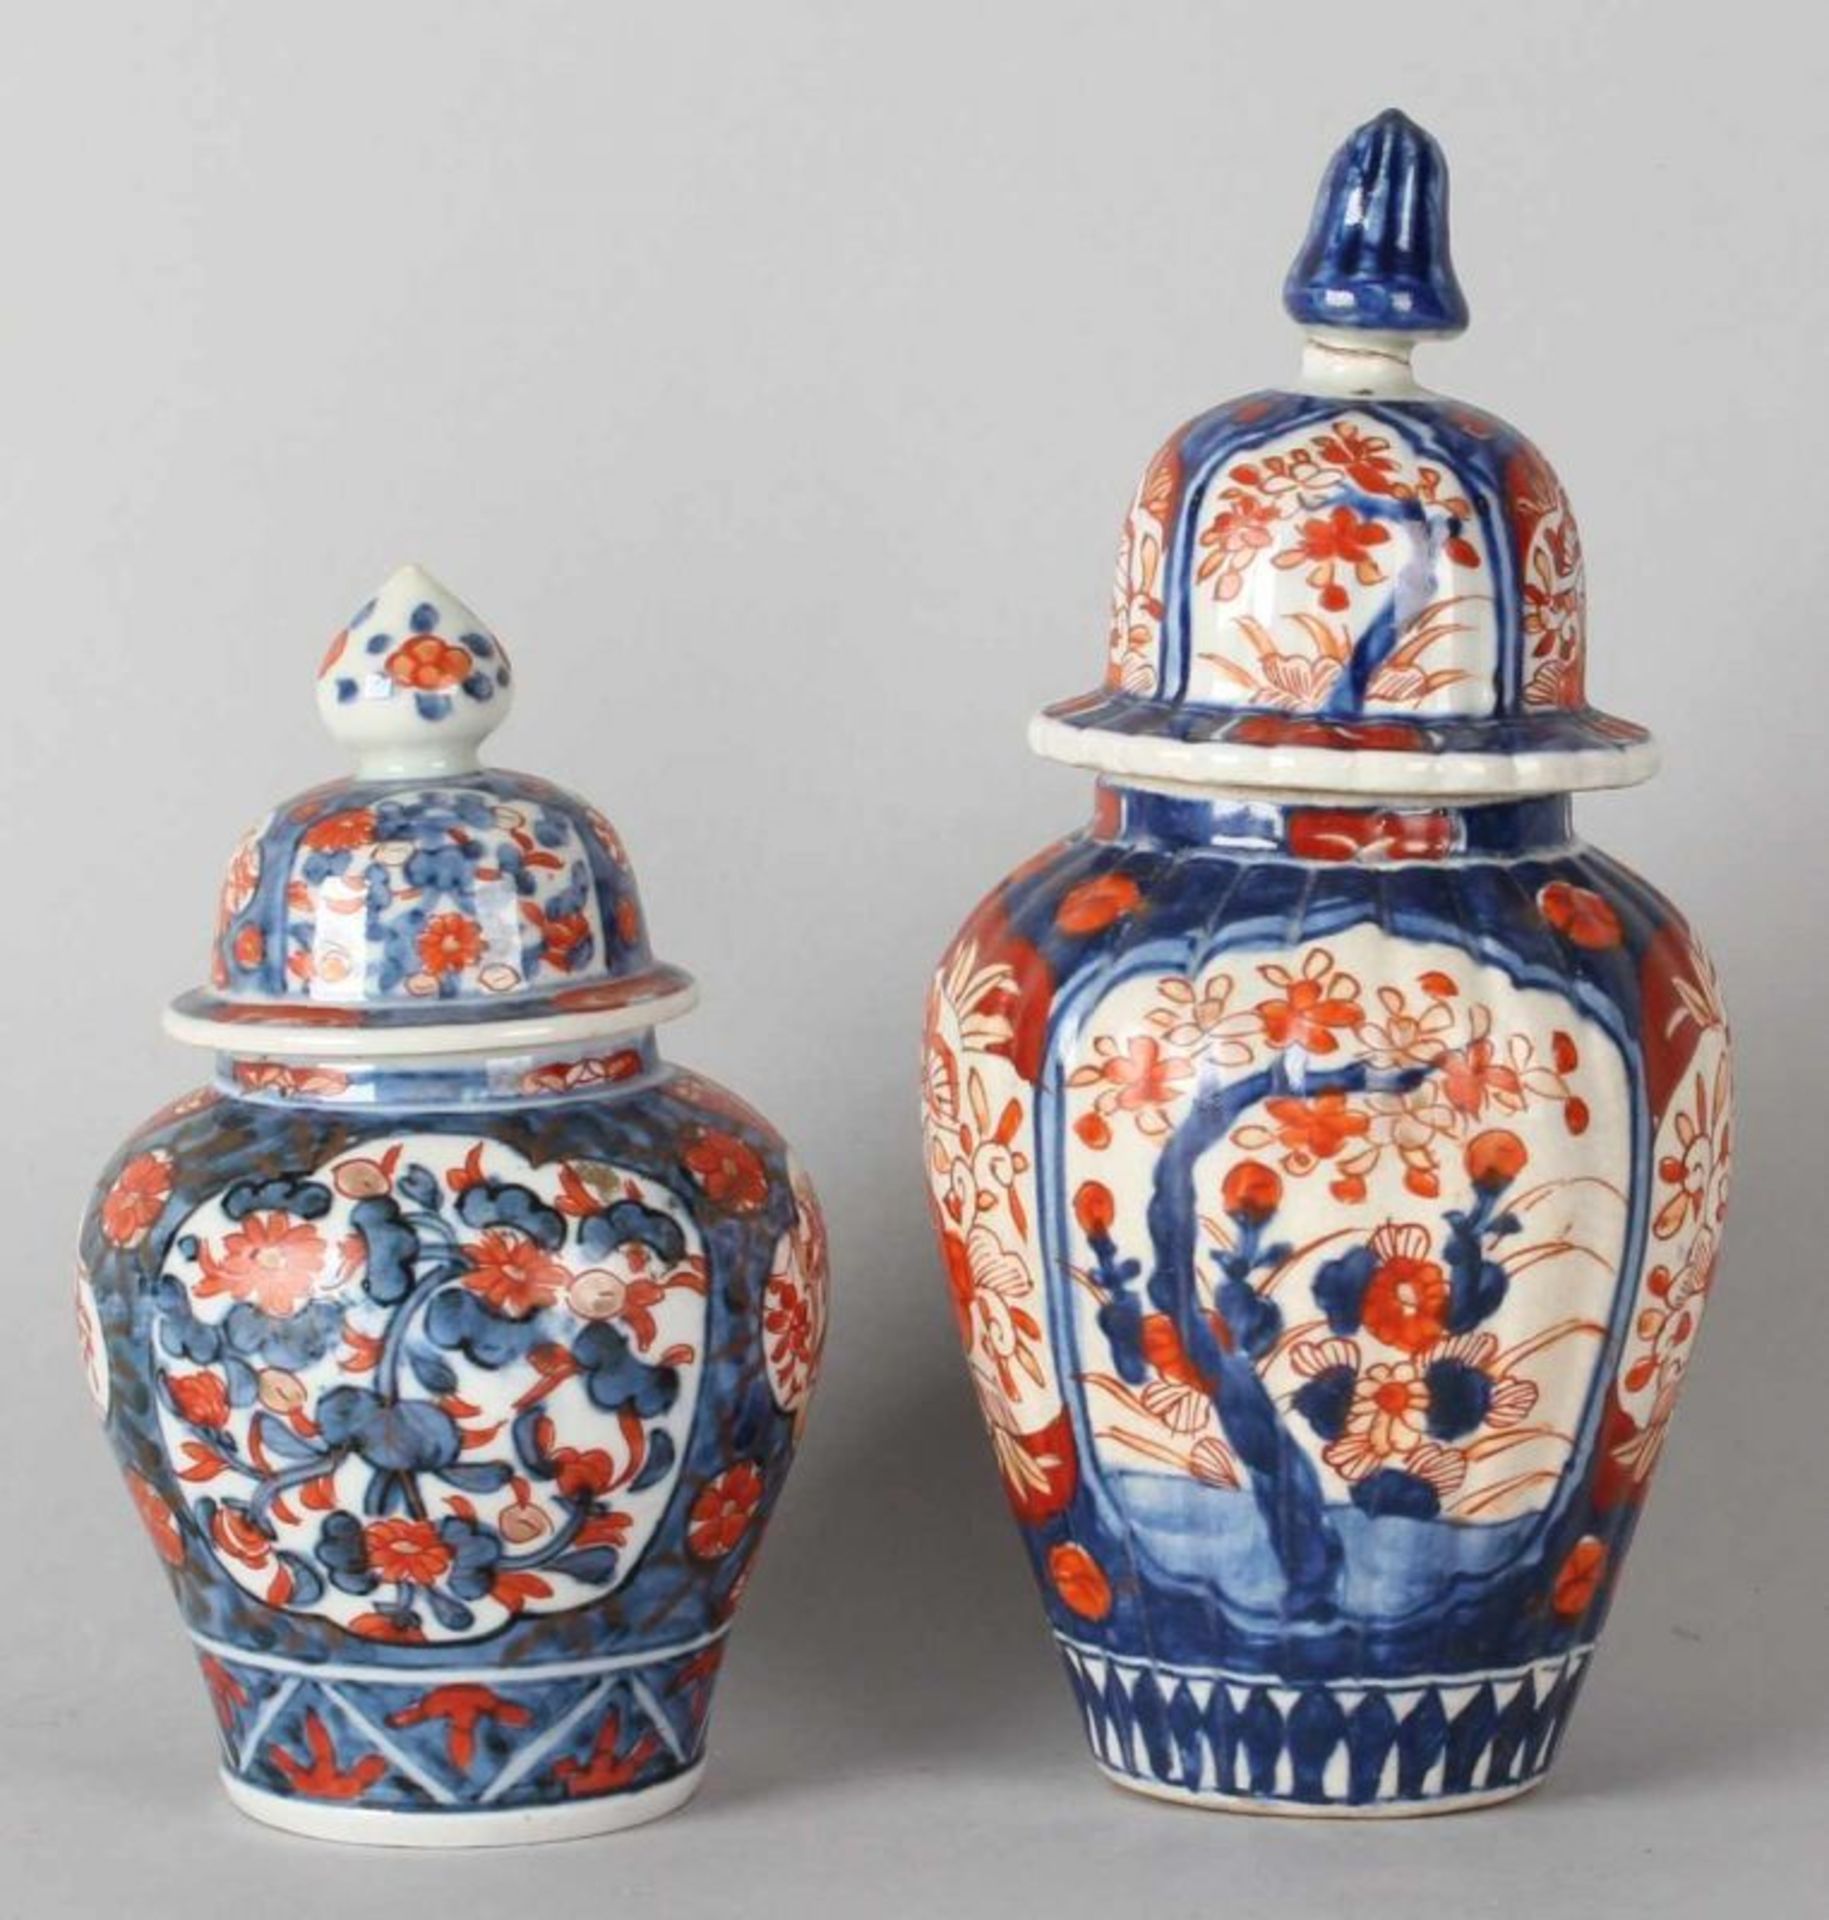 Two pieces of 19th century Imari porcelain covered vases with floral decorations. One dekseltop